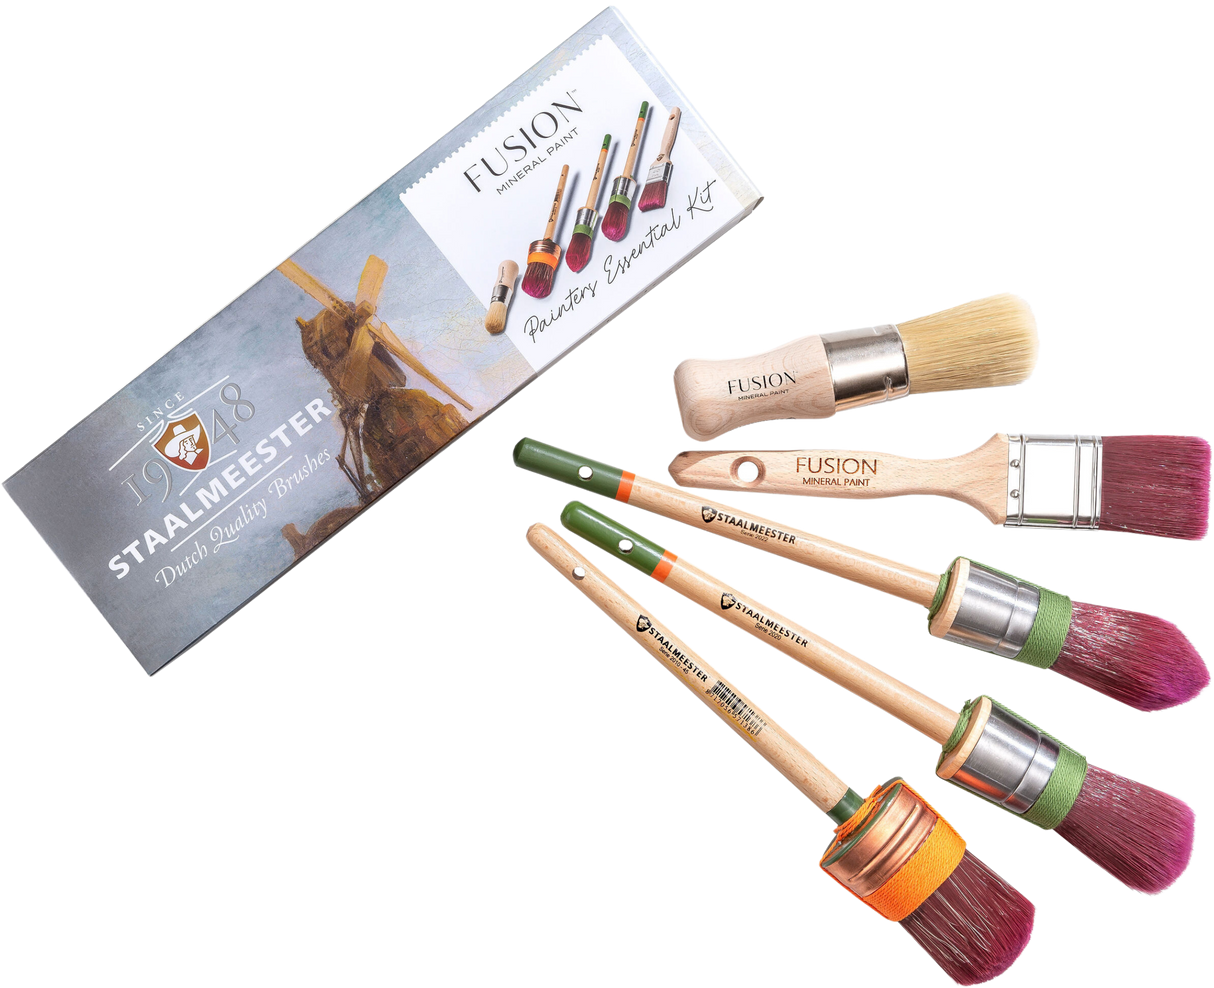 Staalmeester Painter’s Essential Kit Box Gift Set ($154 Value!)